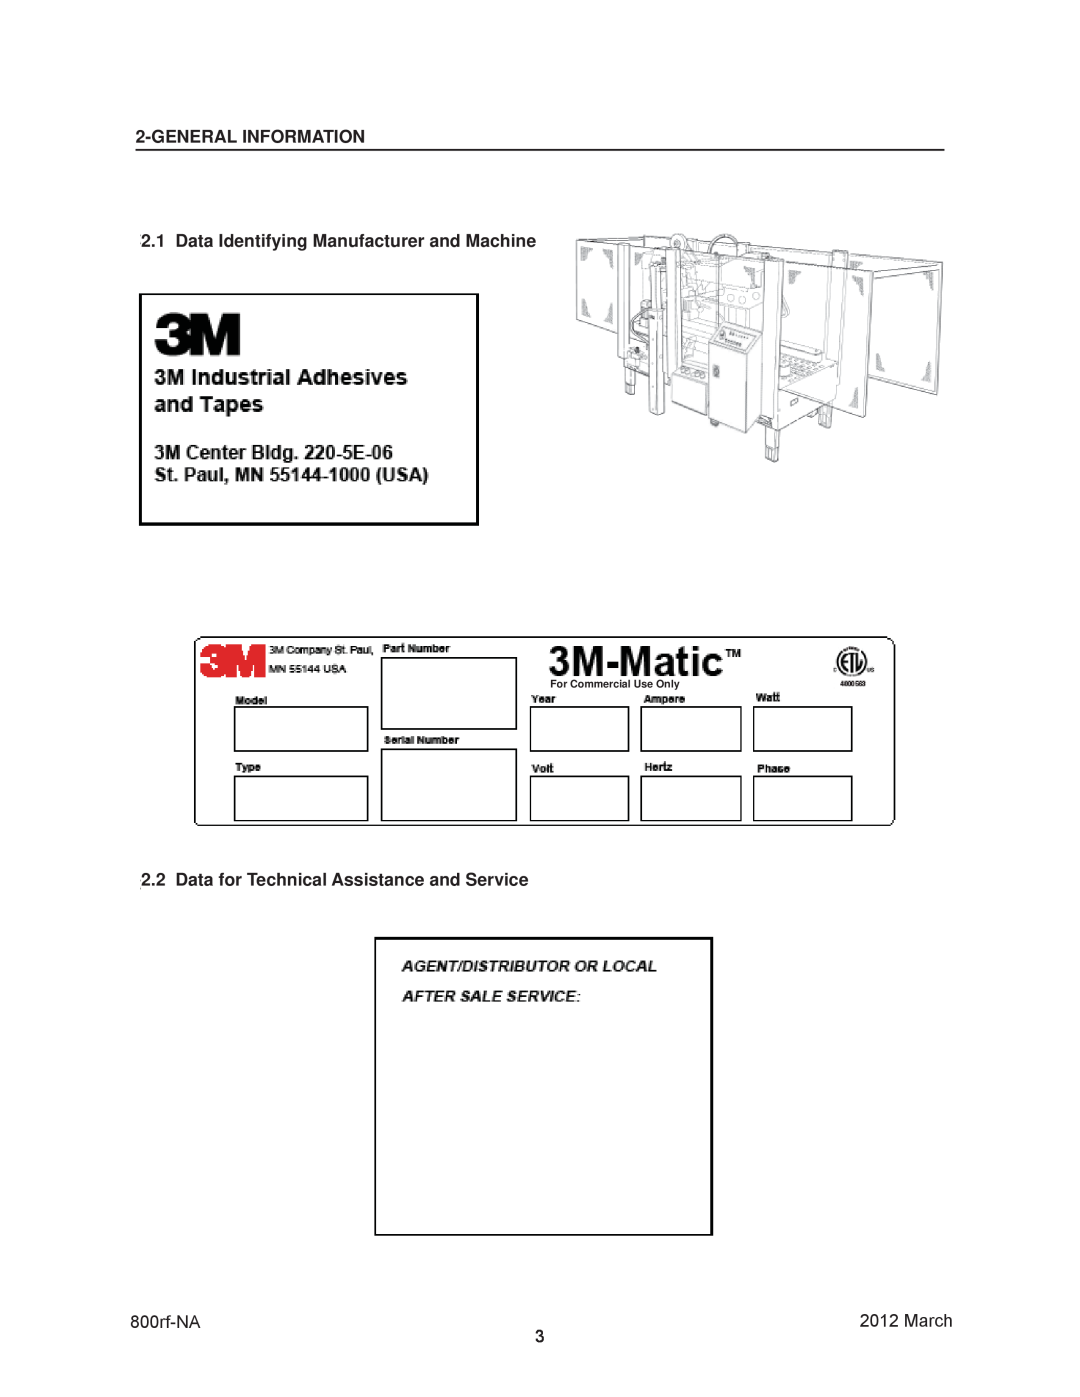 3M 800rf GENERAL INFORMATION 2.1 Data Identifying Manufacturer and Machine, Data for Technical Assistance and Service 